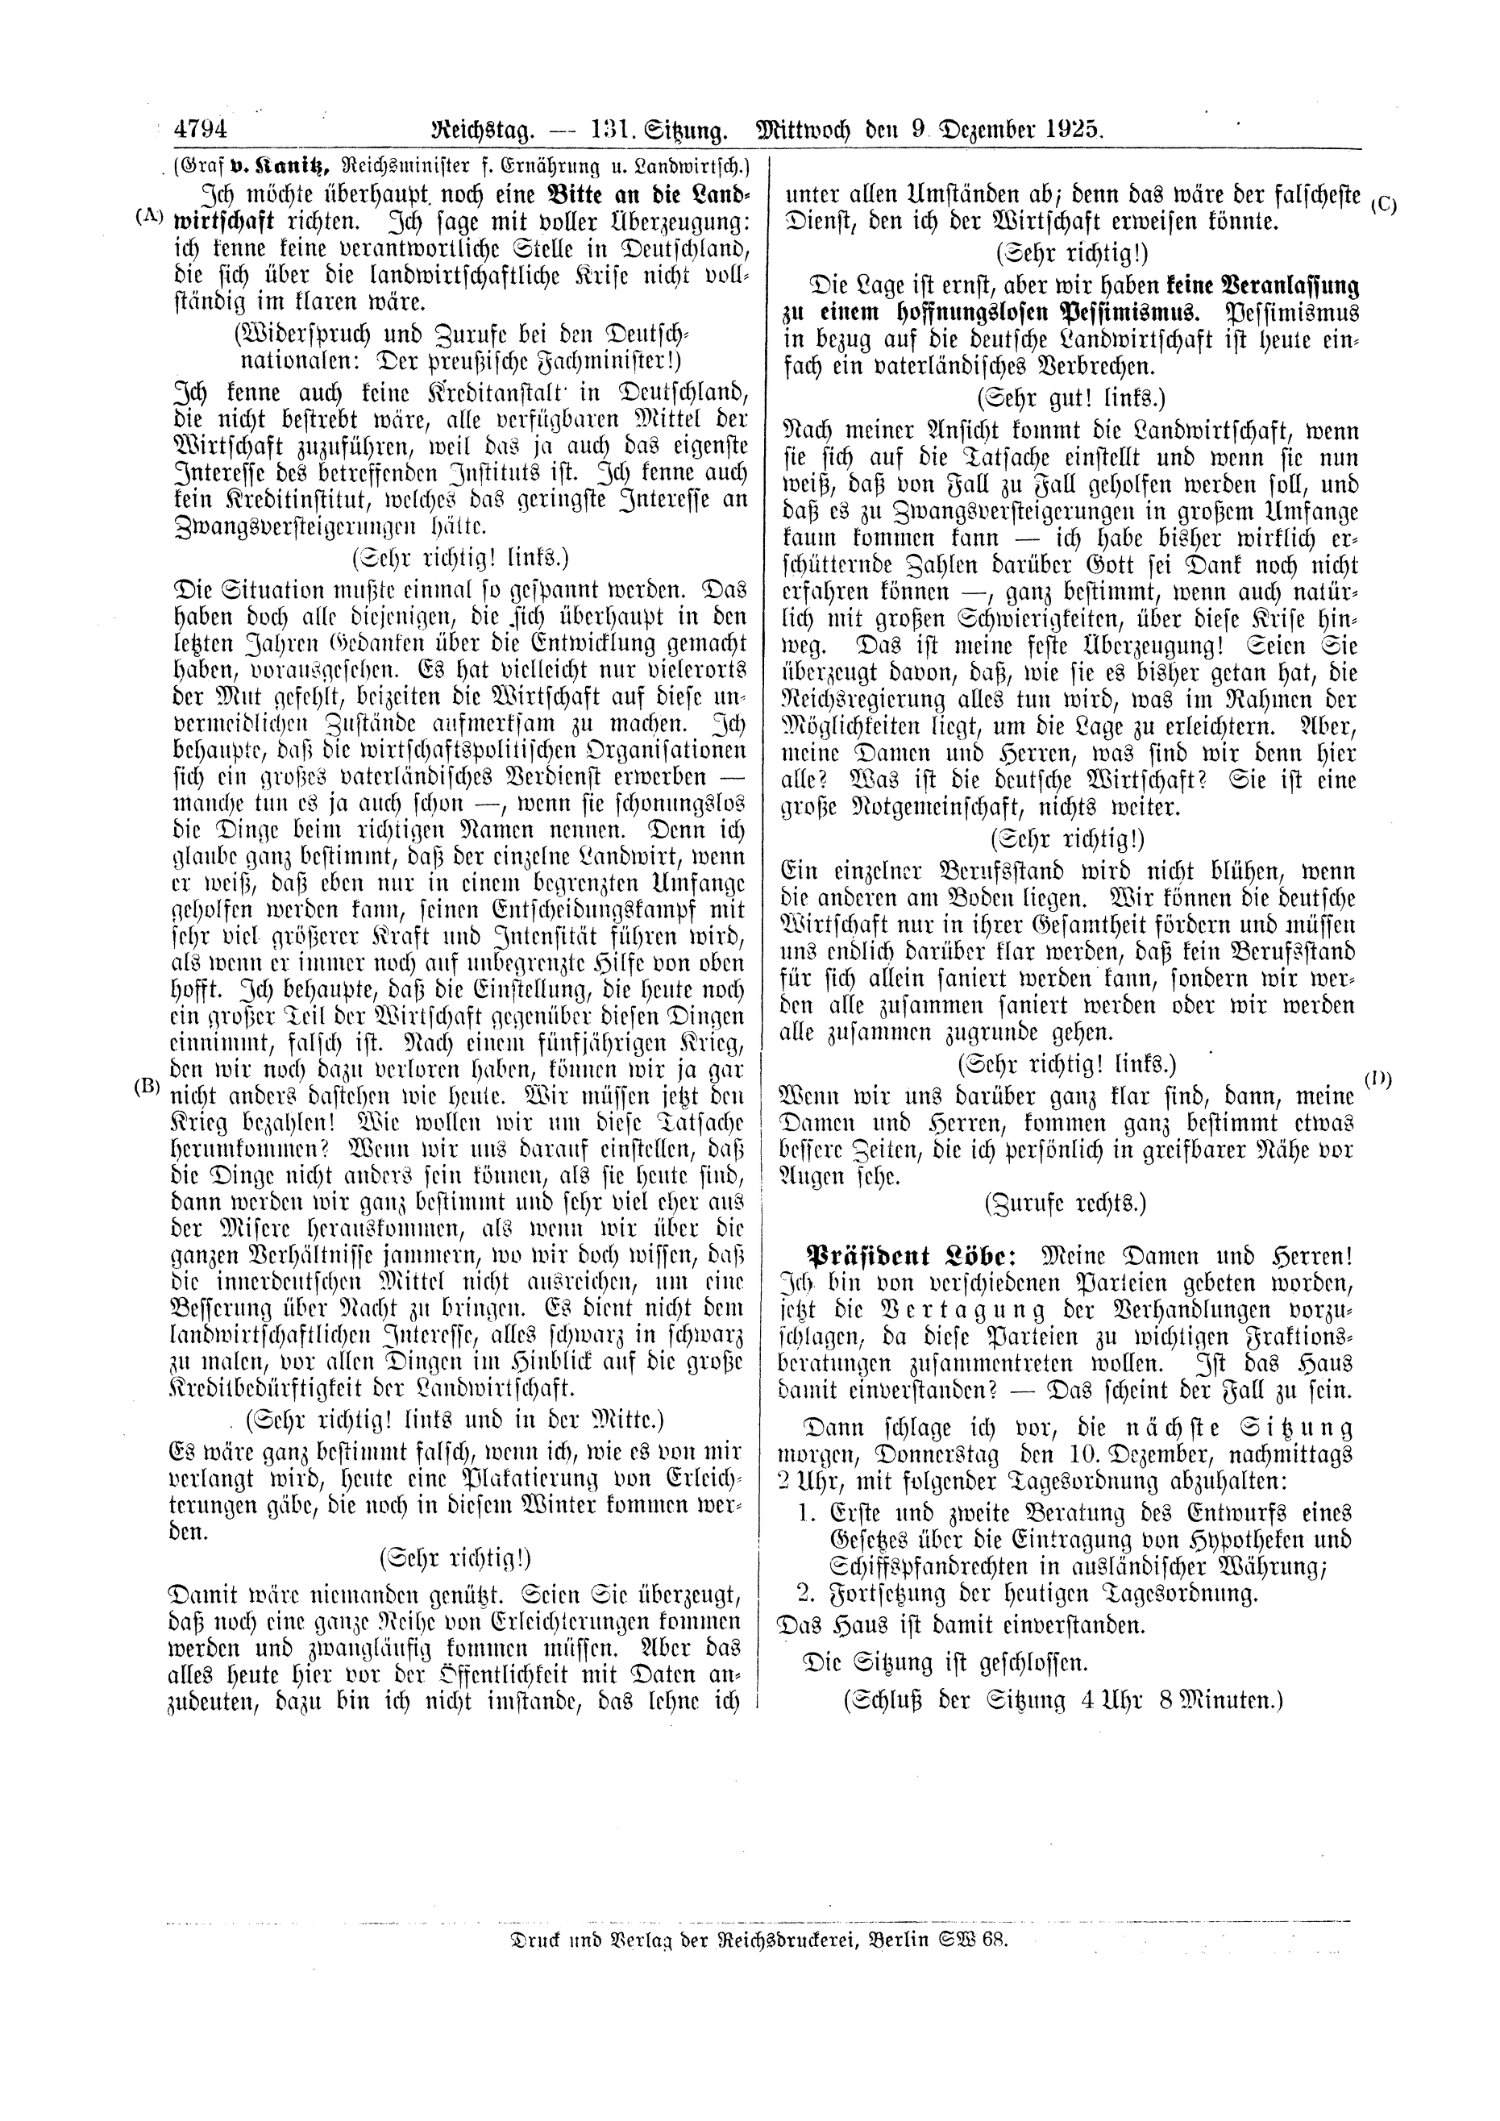 Scan of page 4794